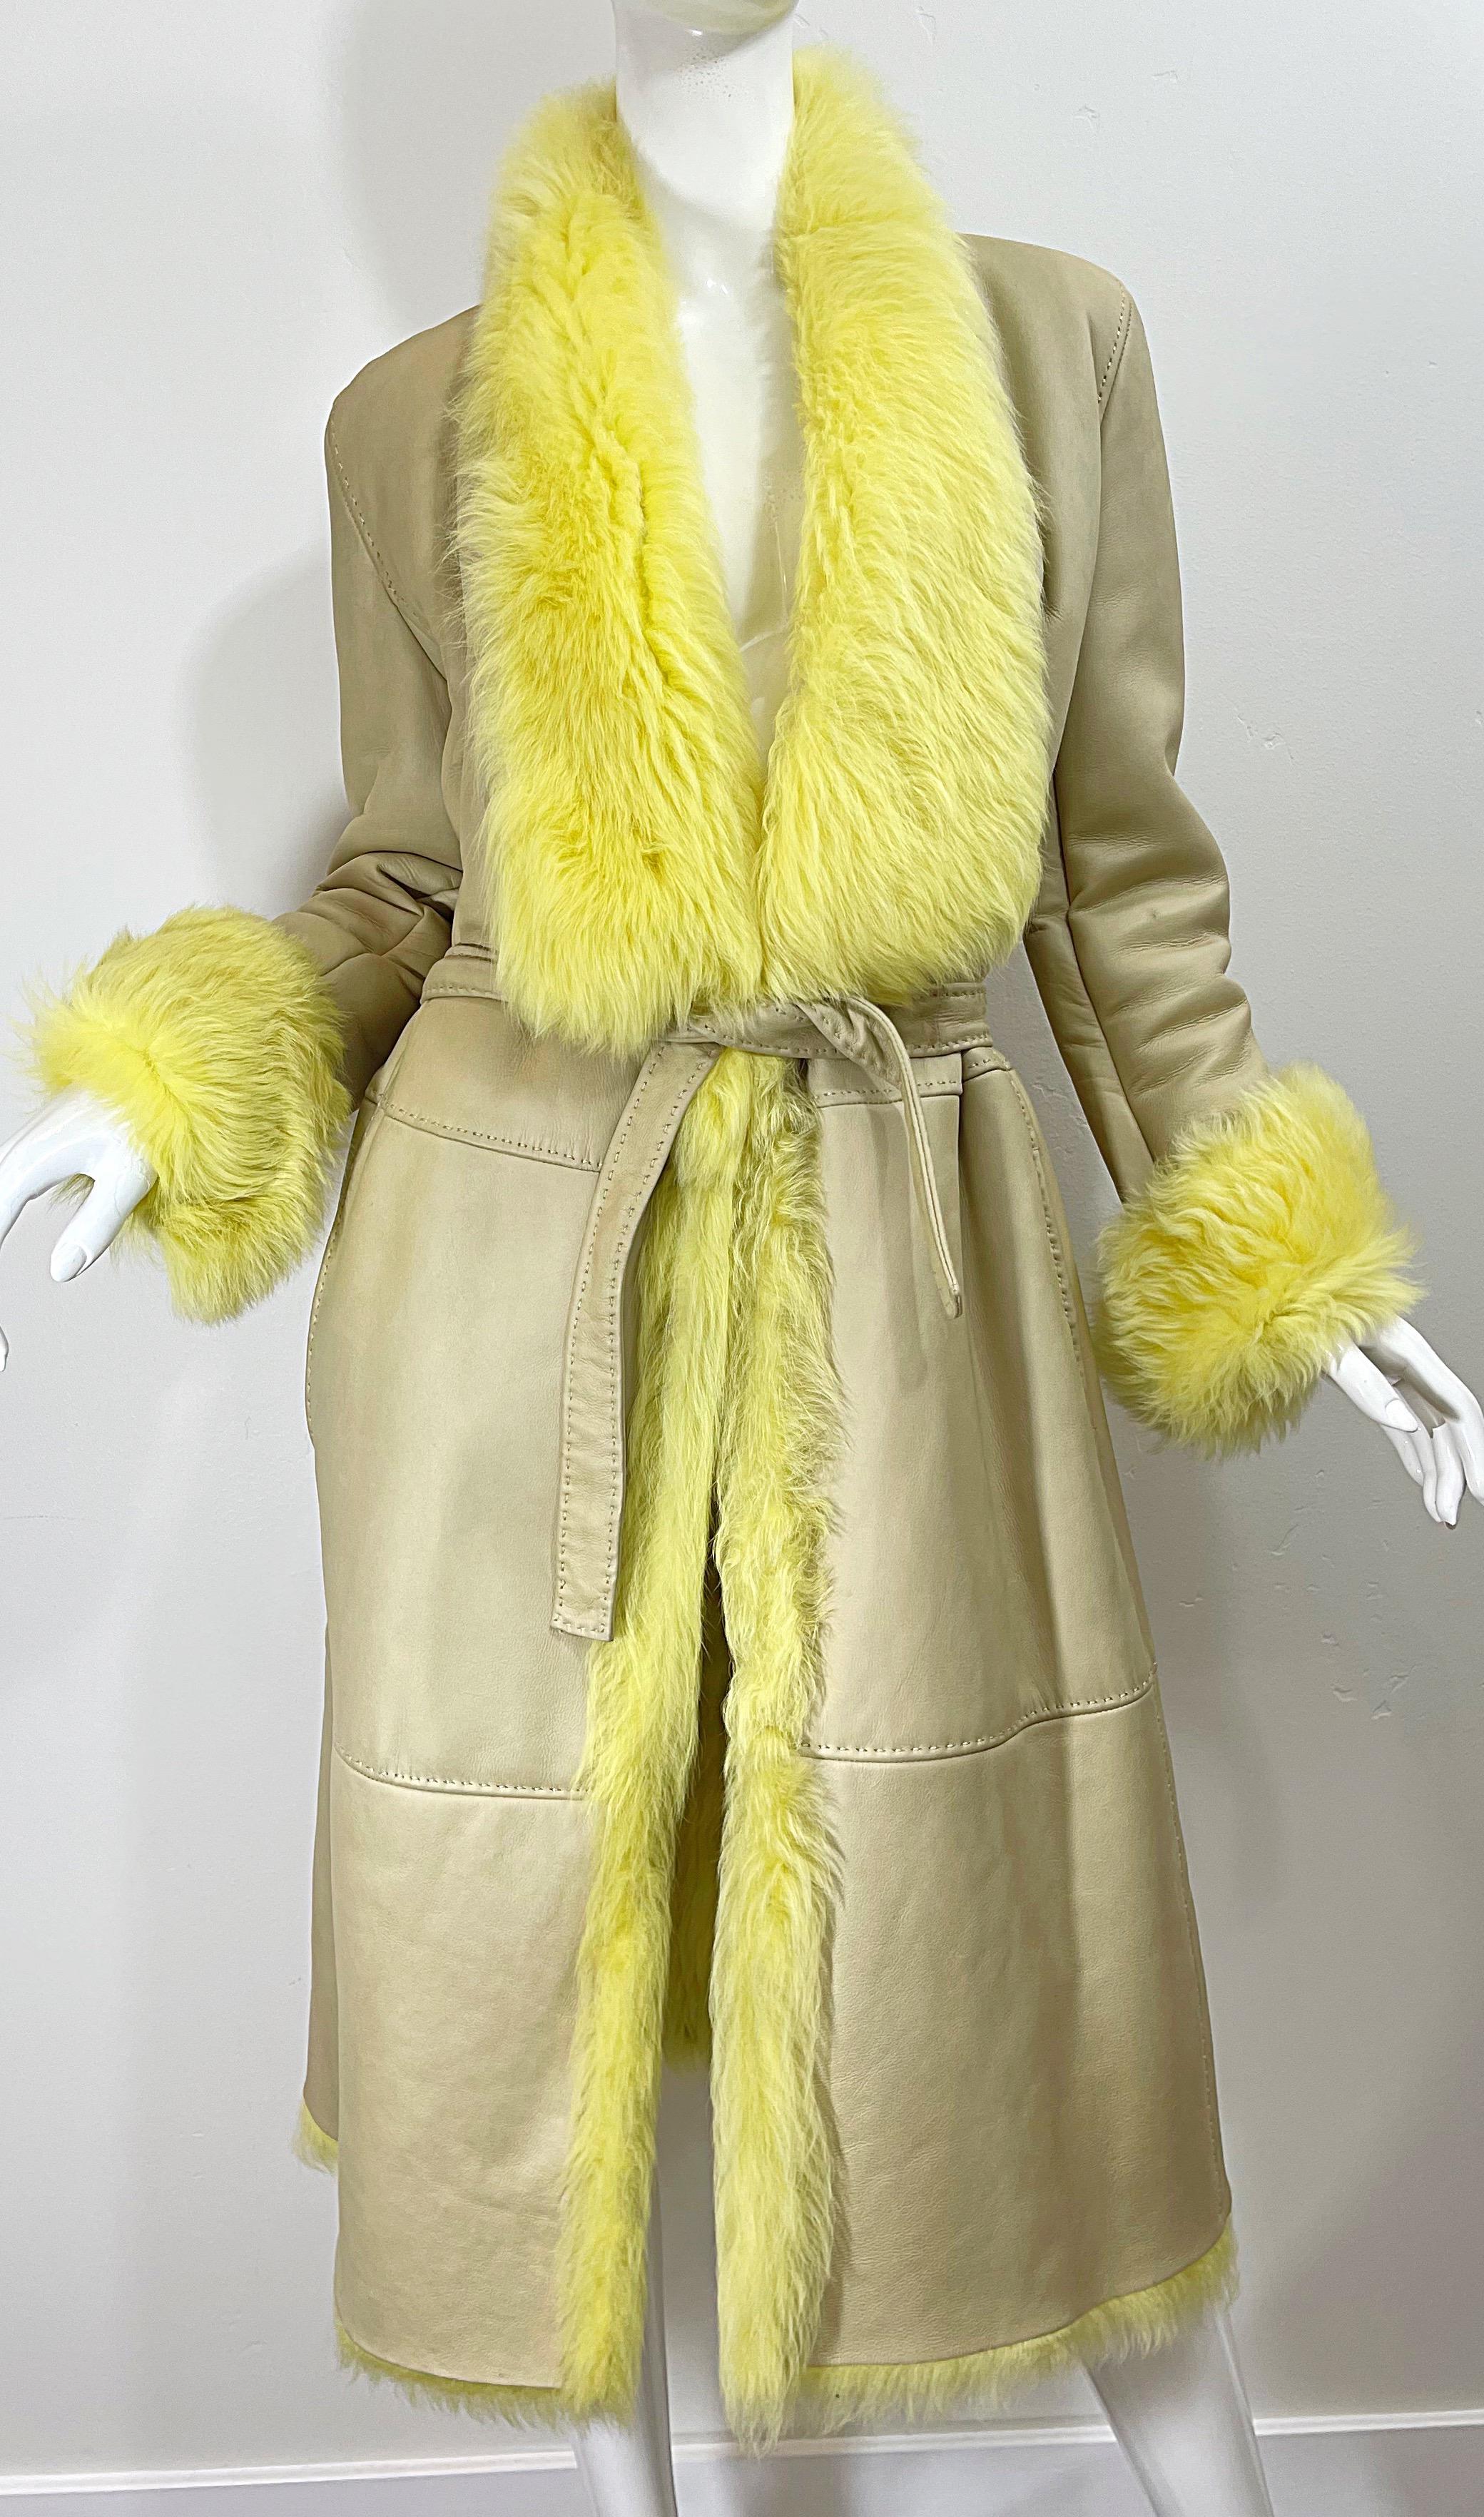 1990s Gianni Versace Tan Leather Yellow Shearling Fur Vintage Trench Coat Jacket For Sale 9